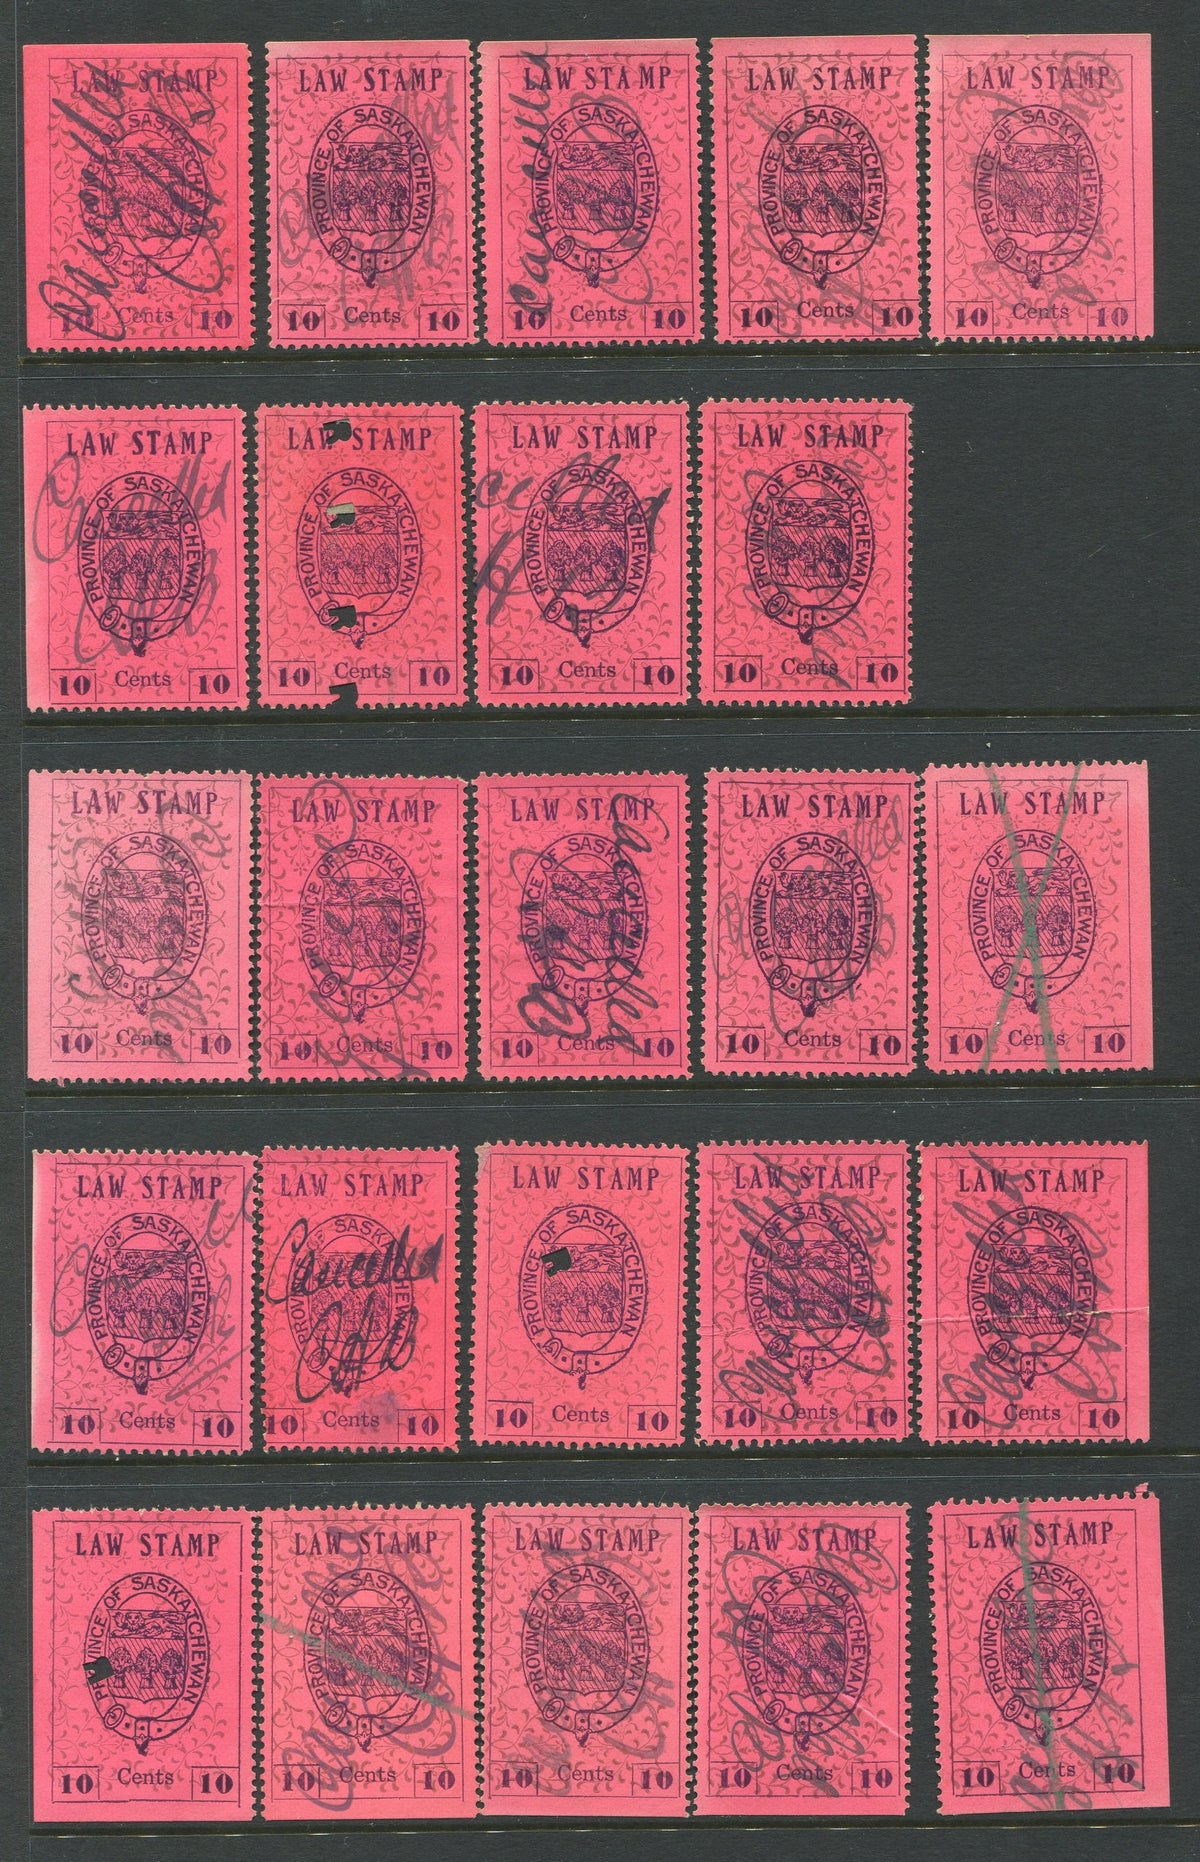 0002SL1709 - SL2 - Used Partially Reconstructed Sheet - Deveney Stamps Ltd. Canadian Stamps